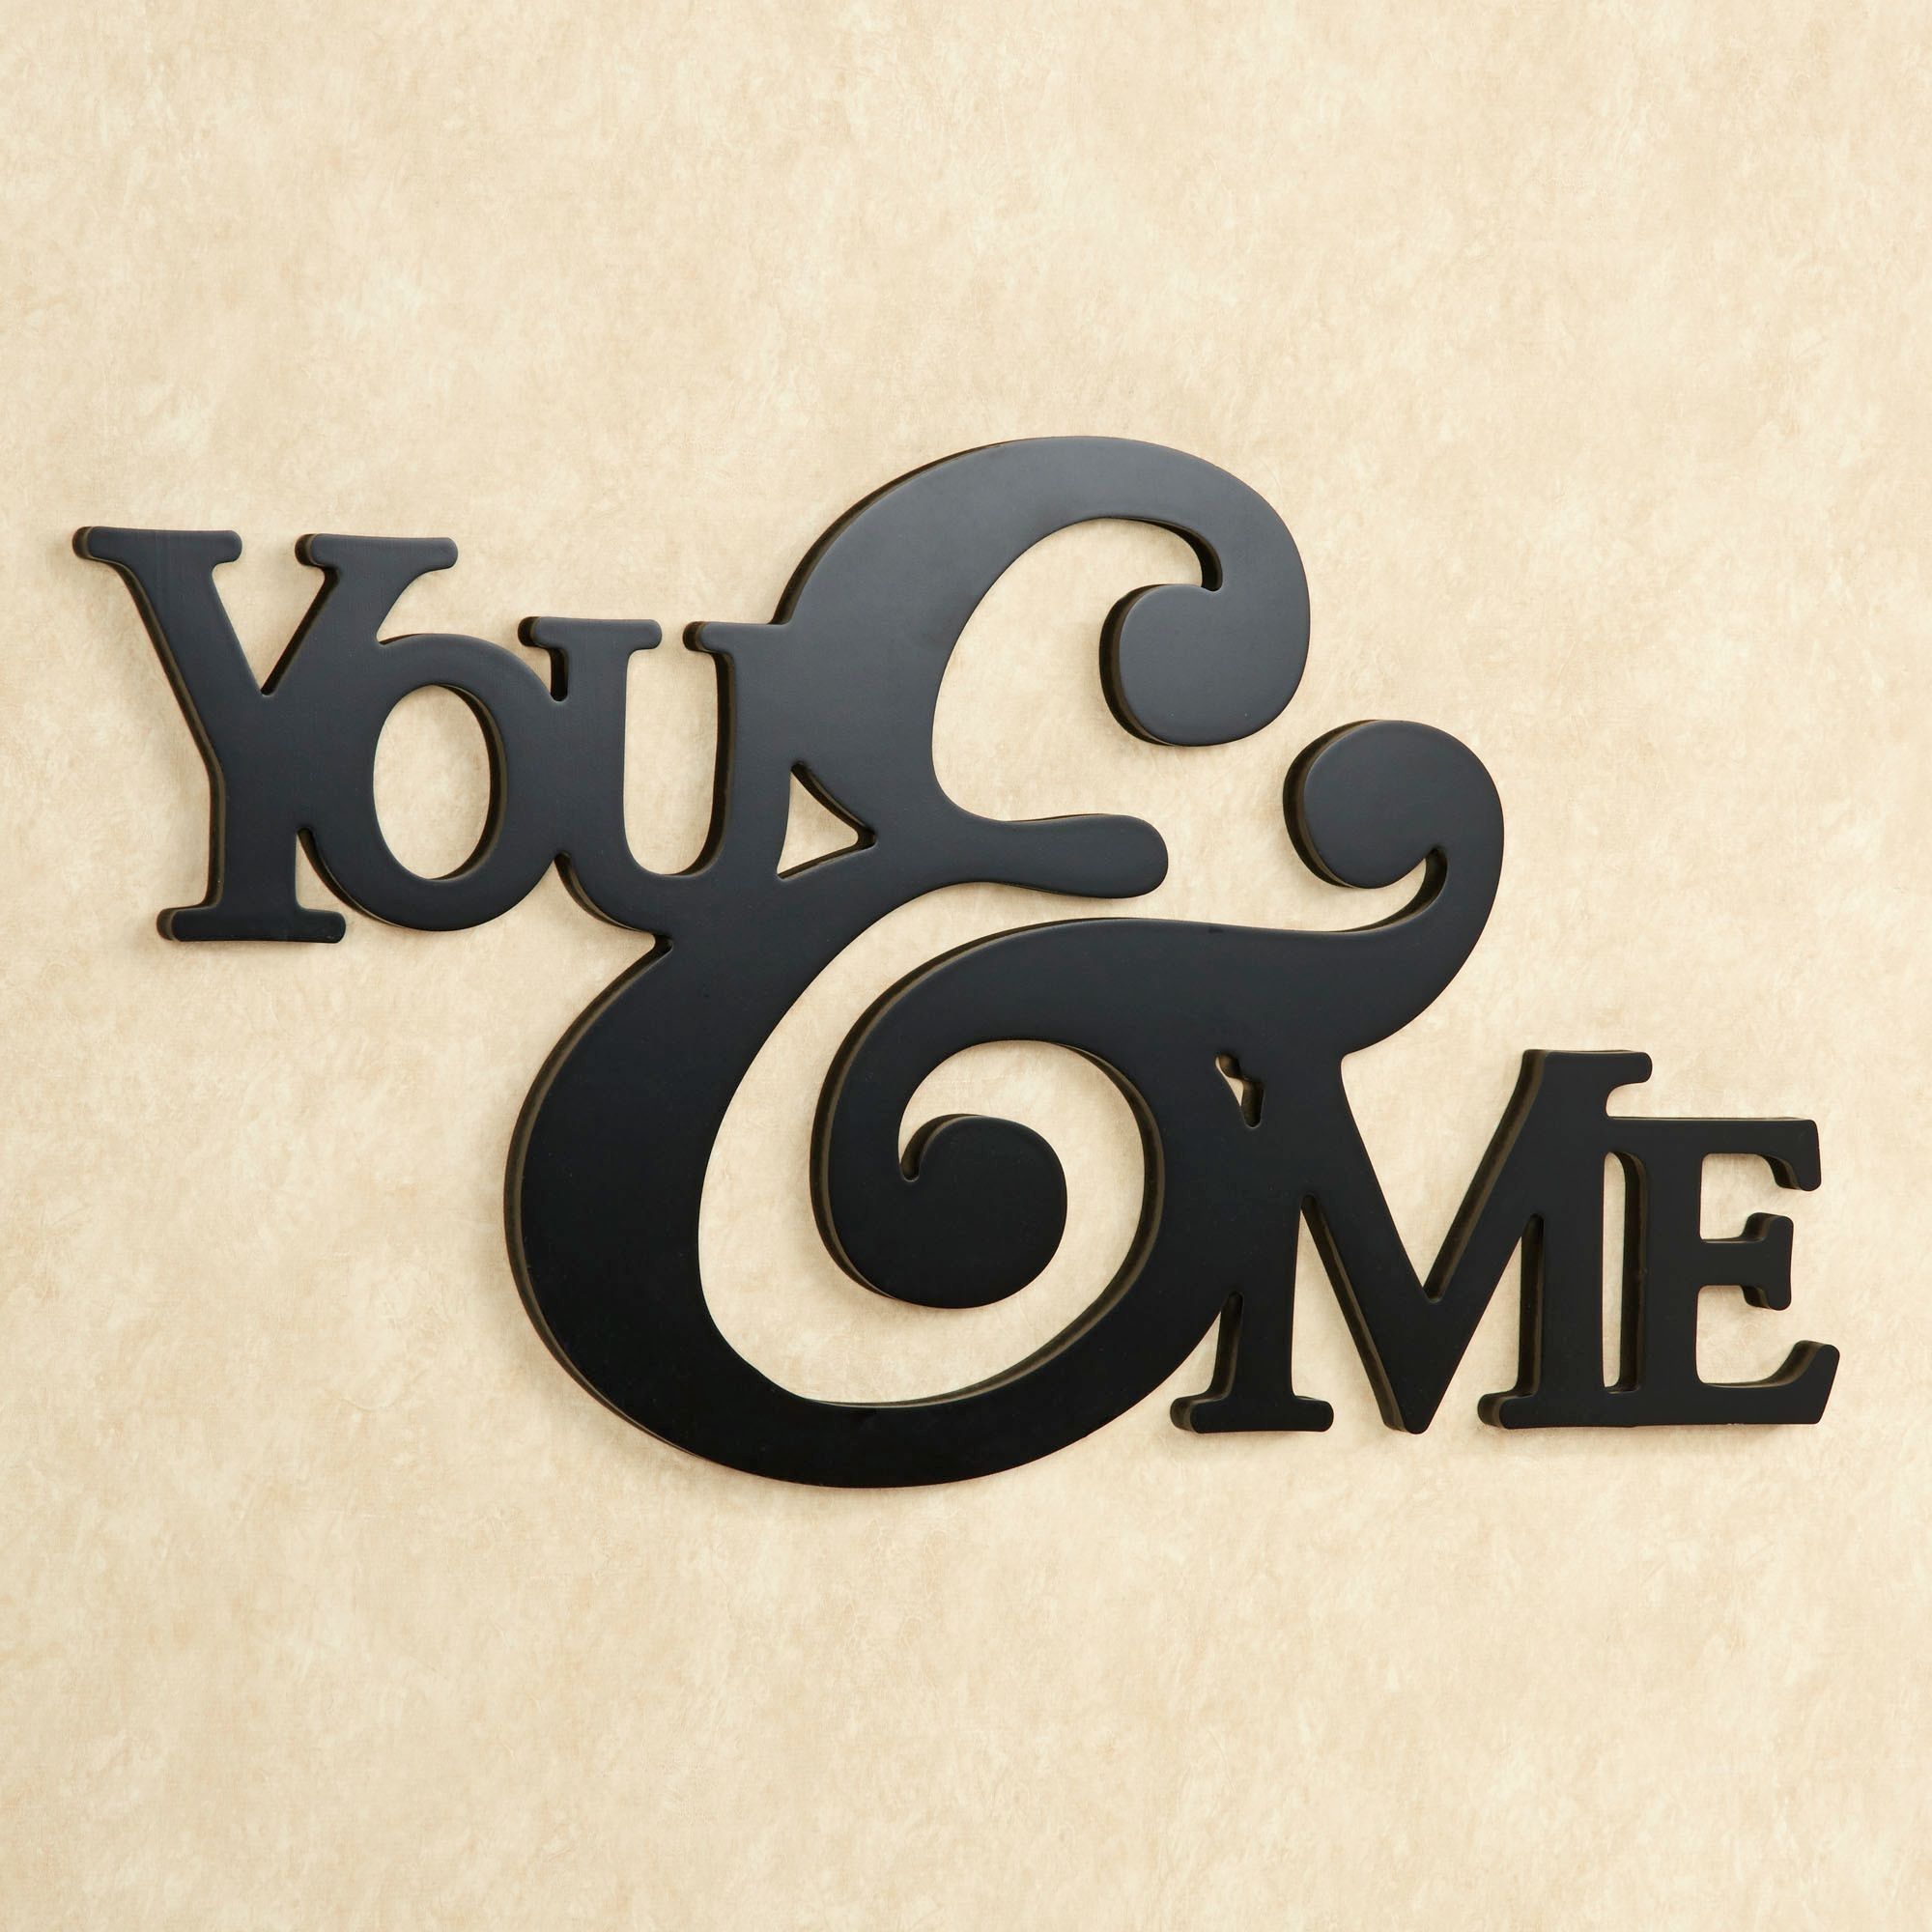 Wall Art Design Ideas: You And Me Word Plaques Wall Art, Word Wall With Regard To Wood Word Wall Art (View 15 of 20)